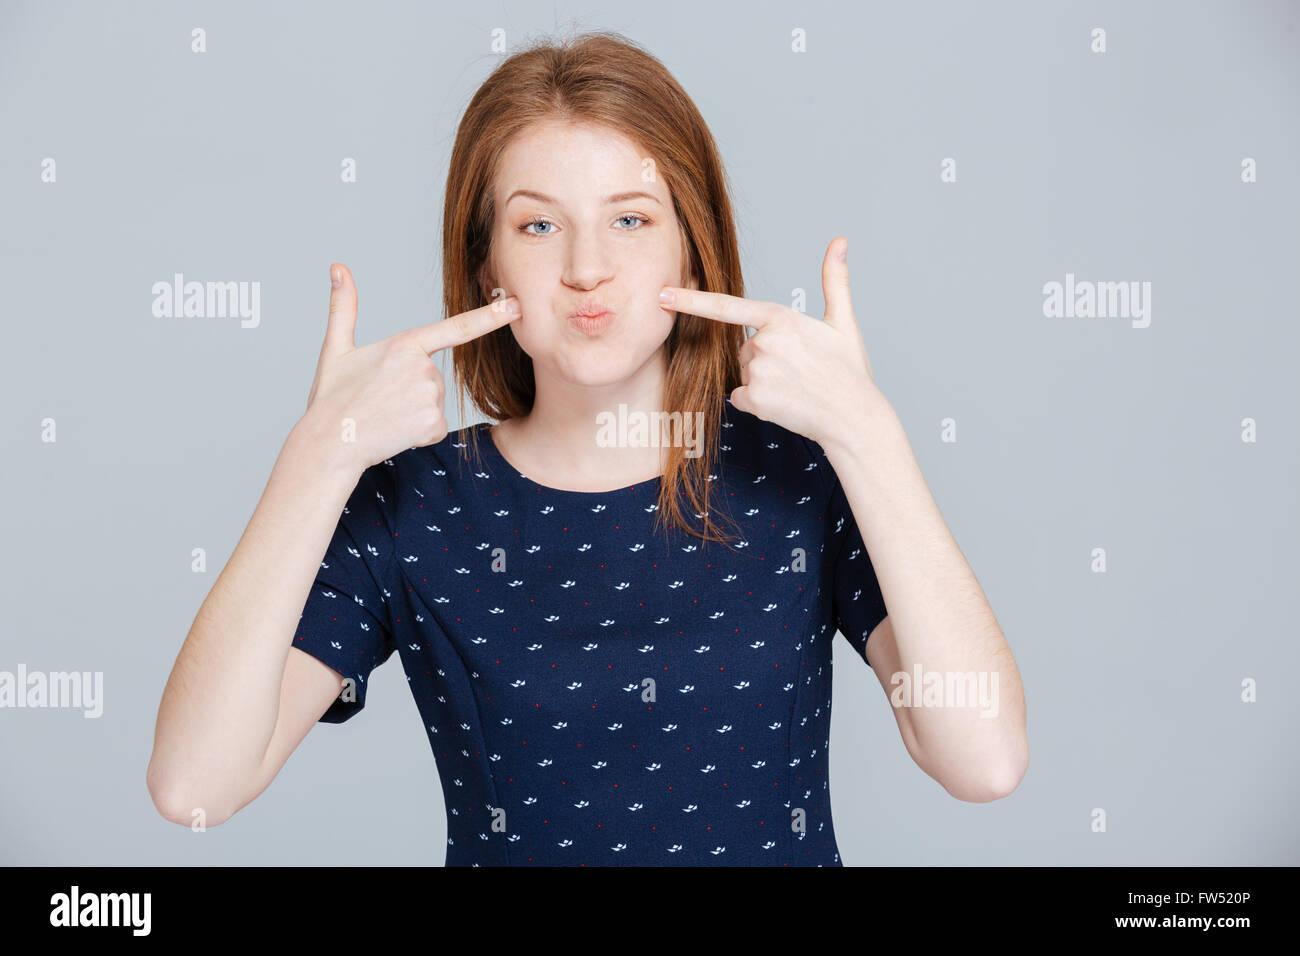 Young woman puffed out her cheeks over gray background Stock Photo